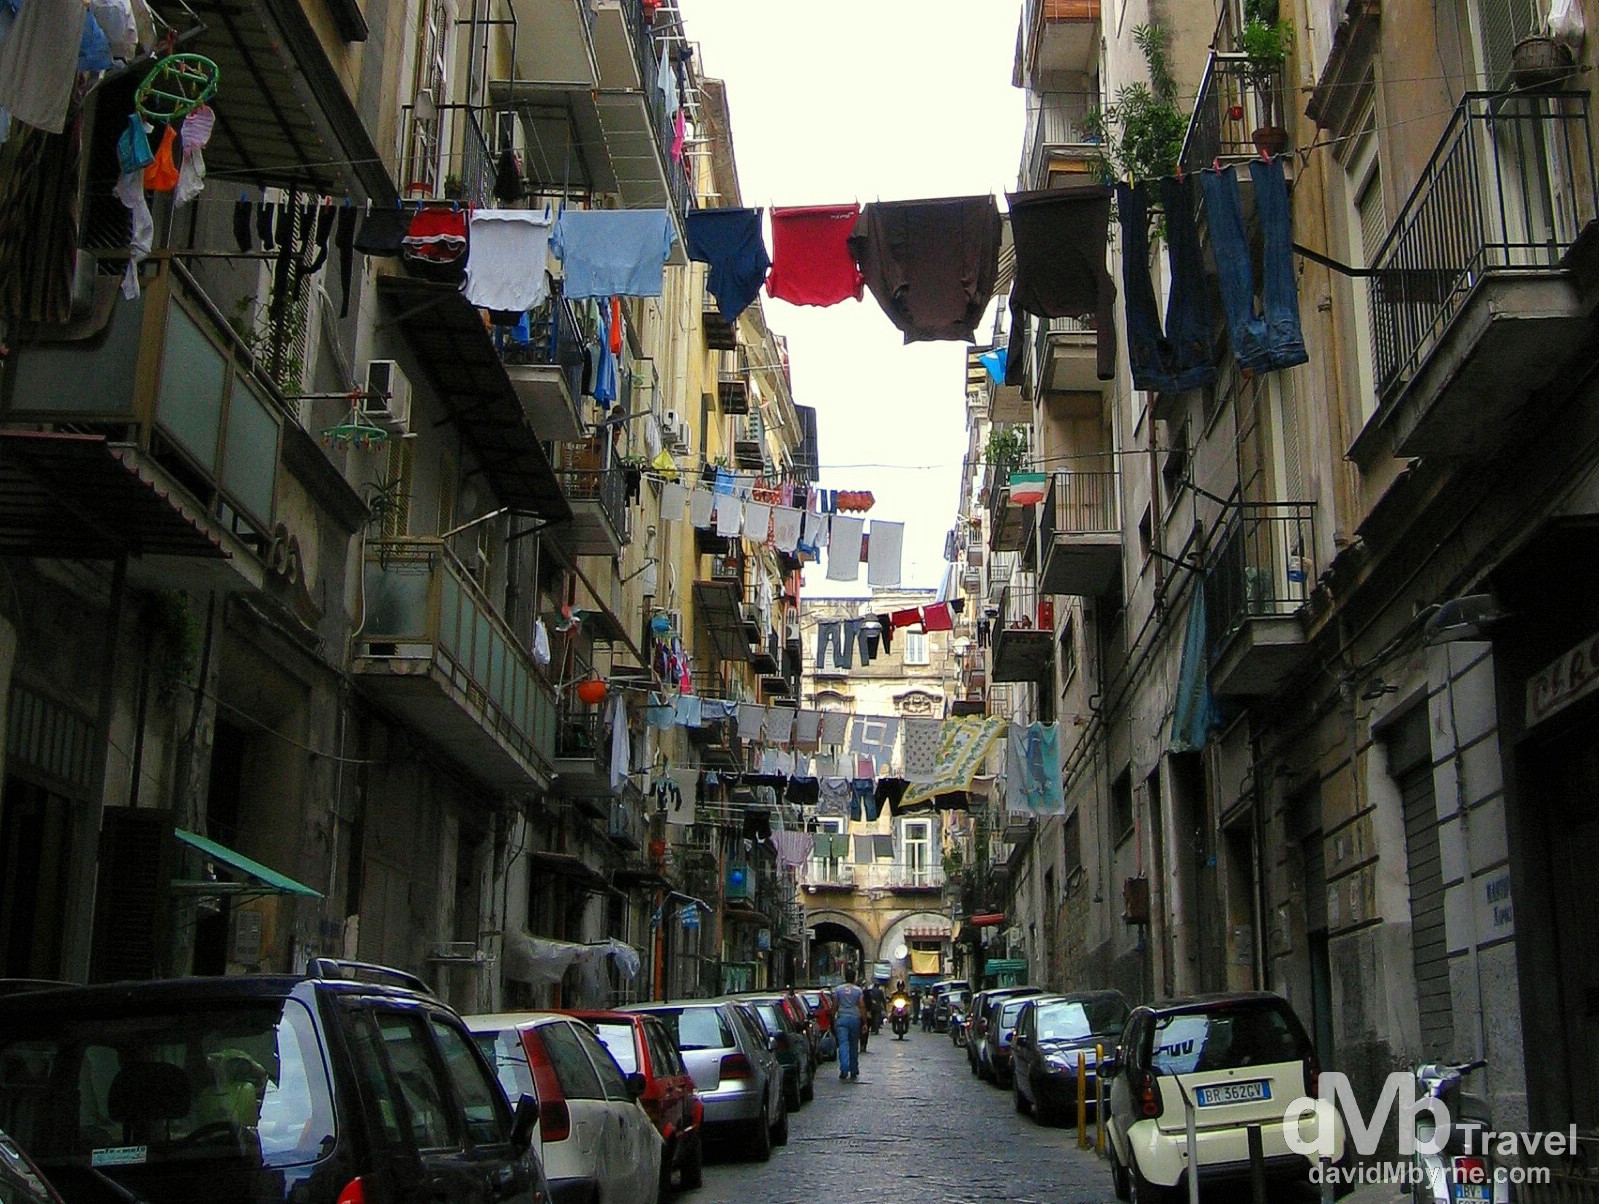 Laundry out to dry in residential lanes in Naples, Italy. September 6th 2007